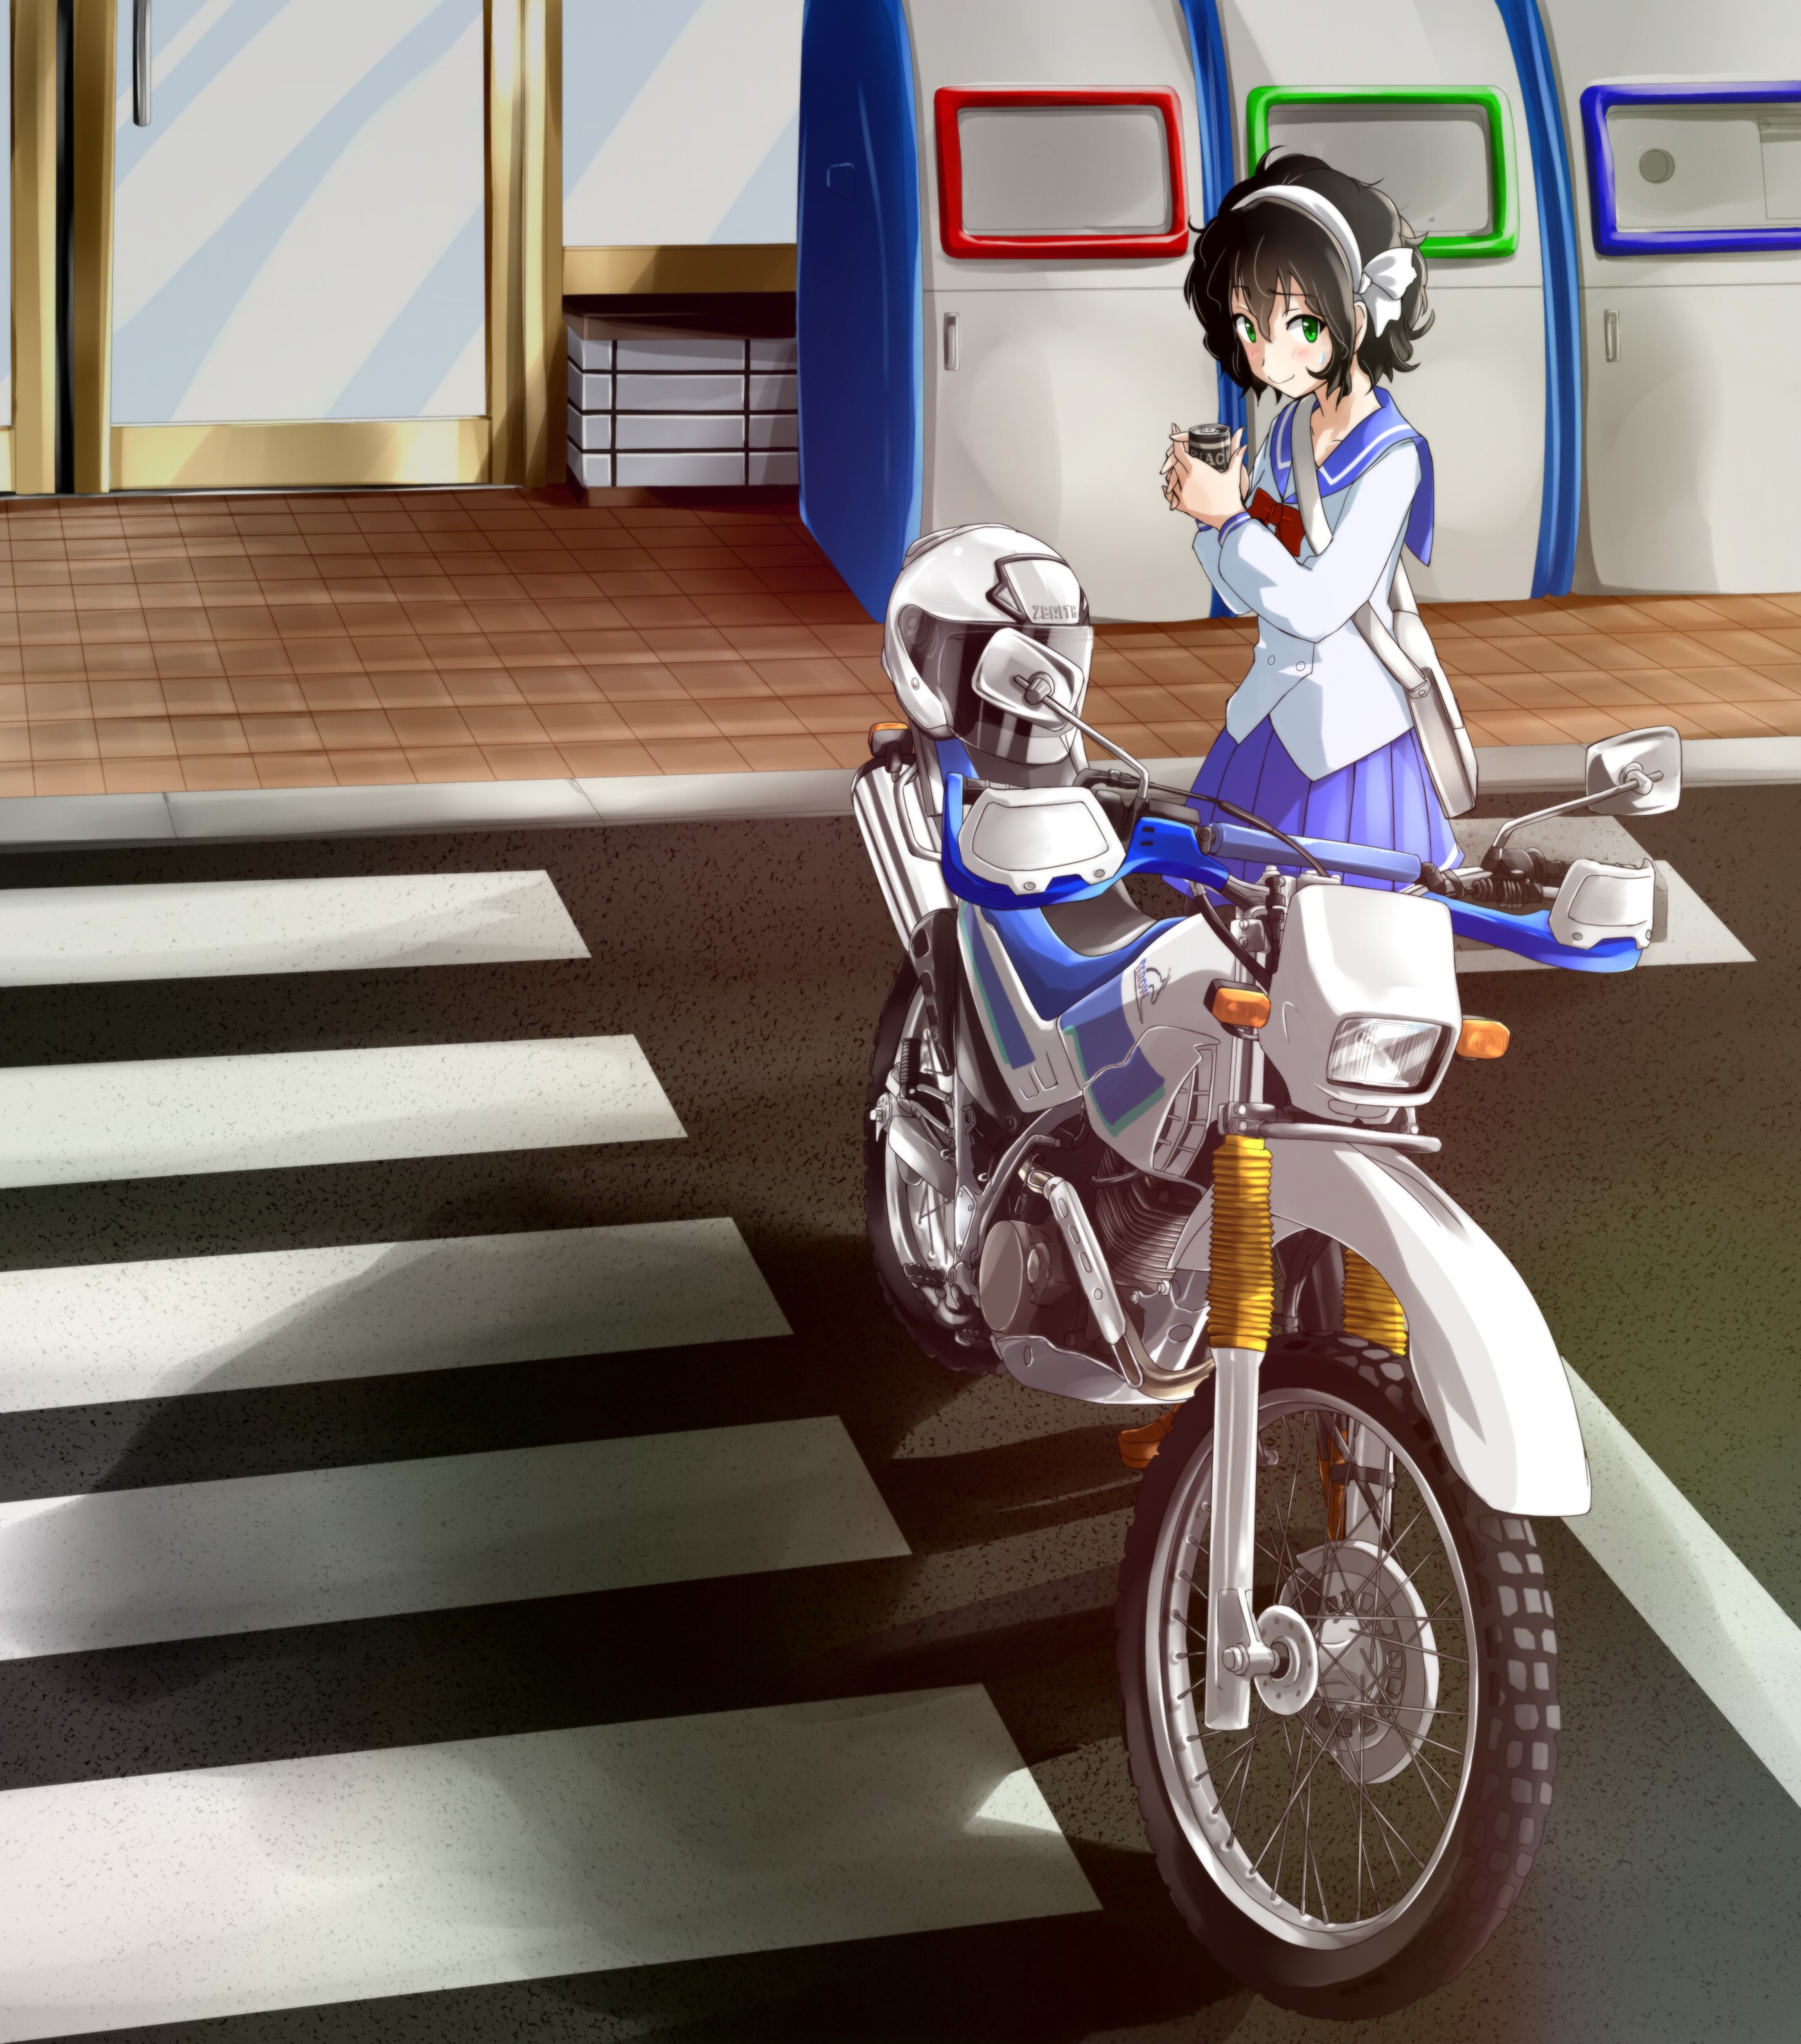 Anime 2600x2950 anime anime girls motorcycle Bakuon!! dark hair Pixiv shoulder length hair vehicle women with motorcycles White Motorcycles looking at viewer can green eyes helmet smiling